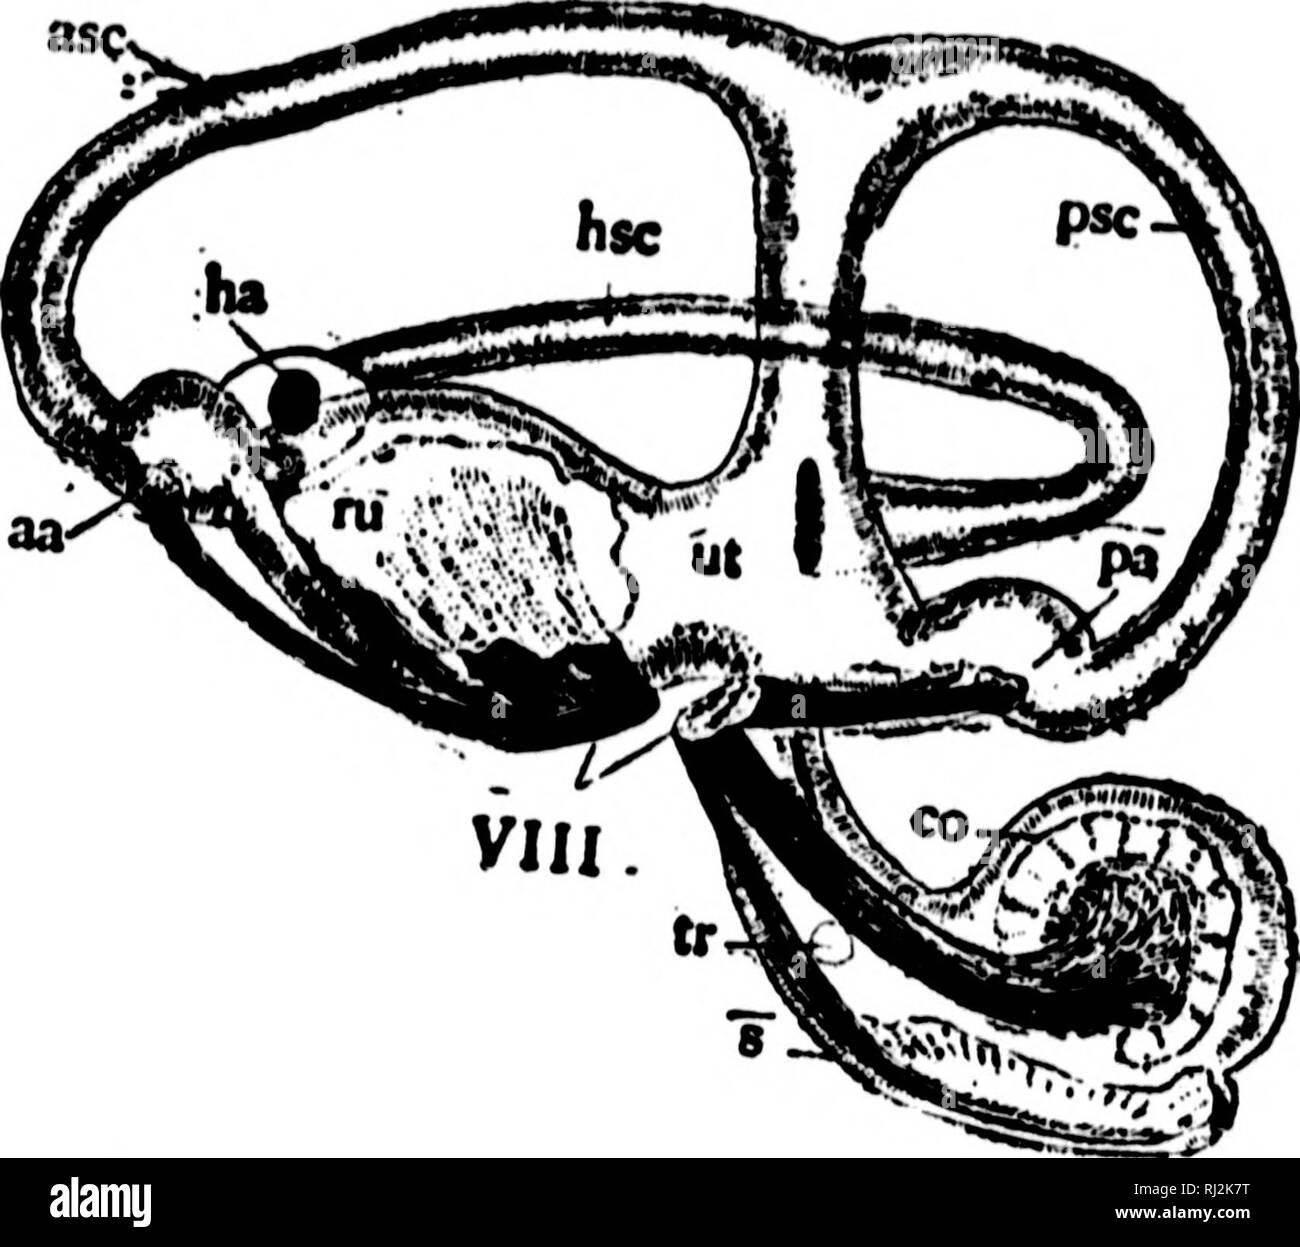 . An introduction to zoology [microform] : for the use of high schools. Zoology; Zoologie. 1IIOII SCHOOL ZOOf.O(!Y. :i7. Fig. 15.—Right Ear of Catnsli, from witJiin. X*. Asc, hso, psc, anterior, horizontal and posterior senii-rircular oarials ; na, ha, pa, thoir ampiillin ; lit, ntricuhiH; rn. rt'cossun utriciili ; VIII, anterior and posterior liranohesof auditory nerve ; co, la^^ena oochlea); 8, Bacculua ; tr, o|&gt;cning of tnvnsverae (liict communicating with the left ear. 46. Of the two parts into wliich the labyrinth is divided, (Fig. 16) the lower is largely concealed by a little shelf p Stock Photo